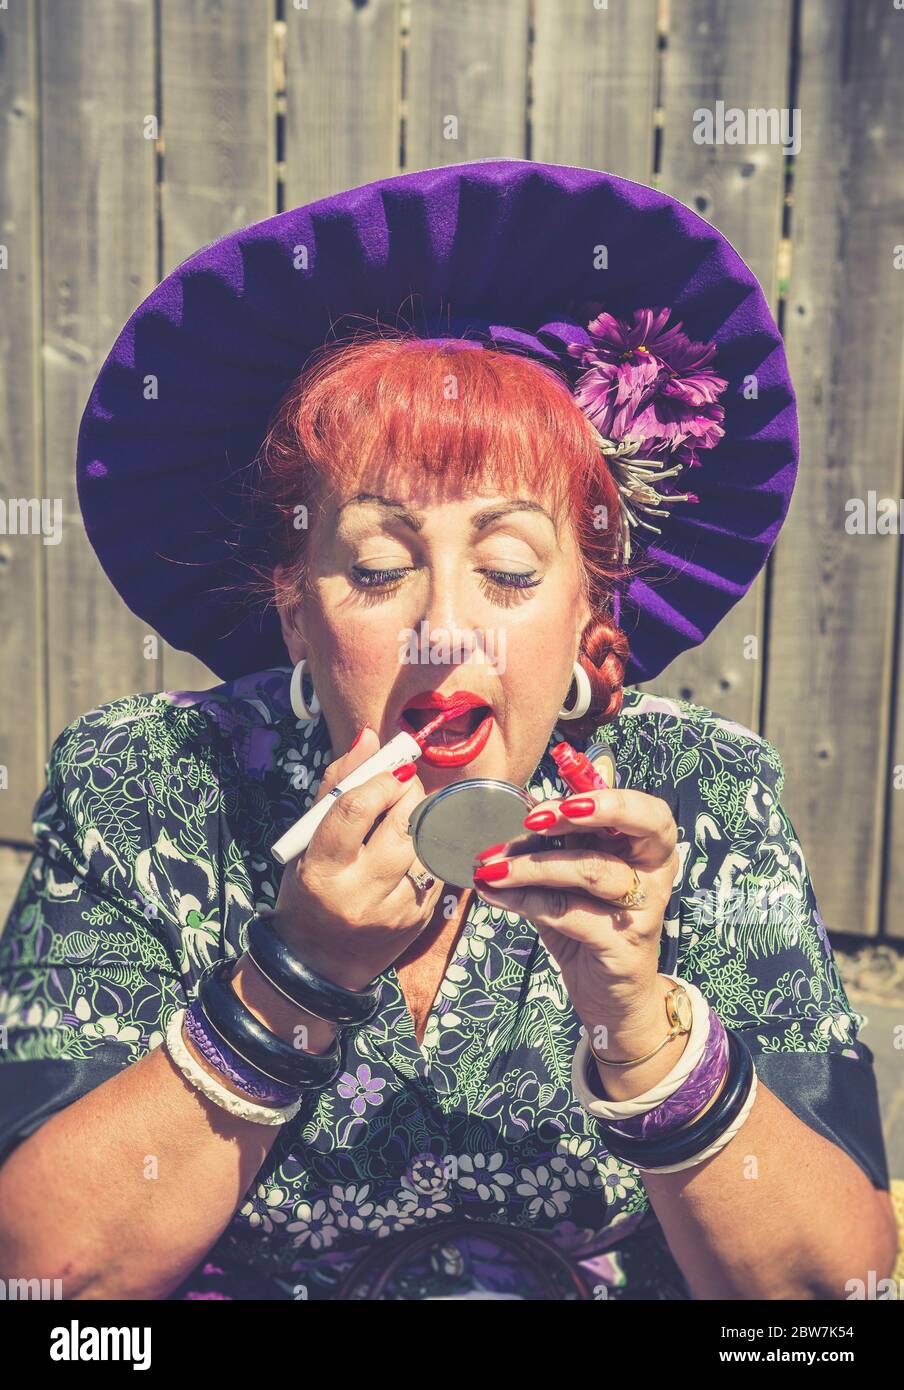 Close up of isolated woman in bid, purple hat putting on bright red lipstick, outdoors in sunshine at 1940s WW2 reenactment event, UK. Stock Photo